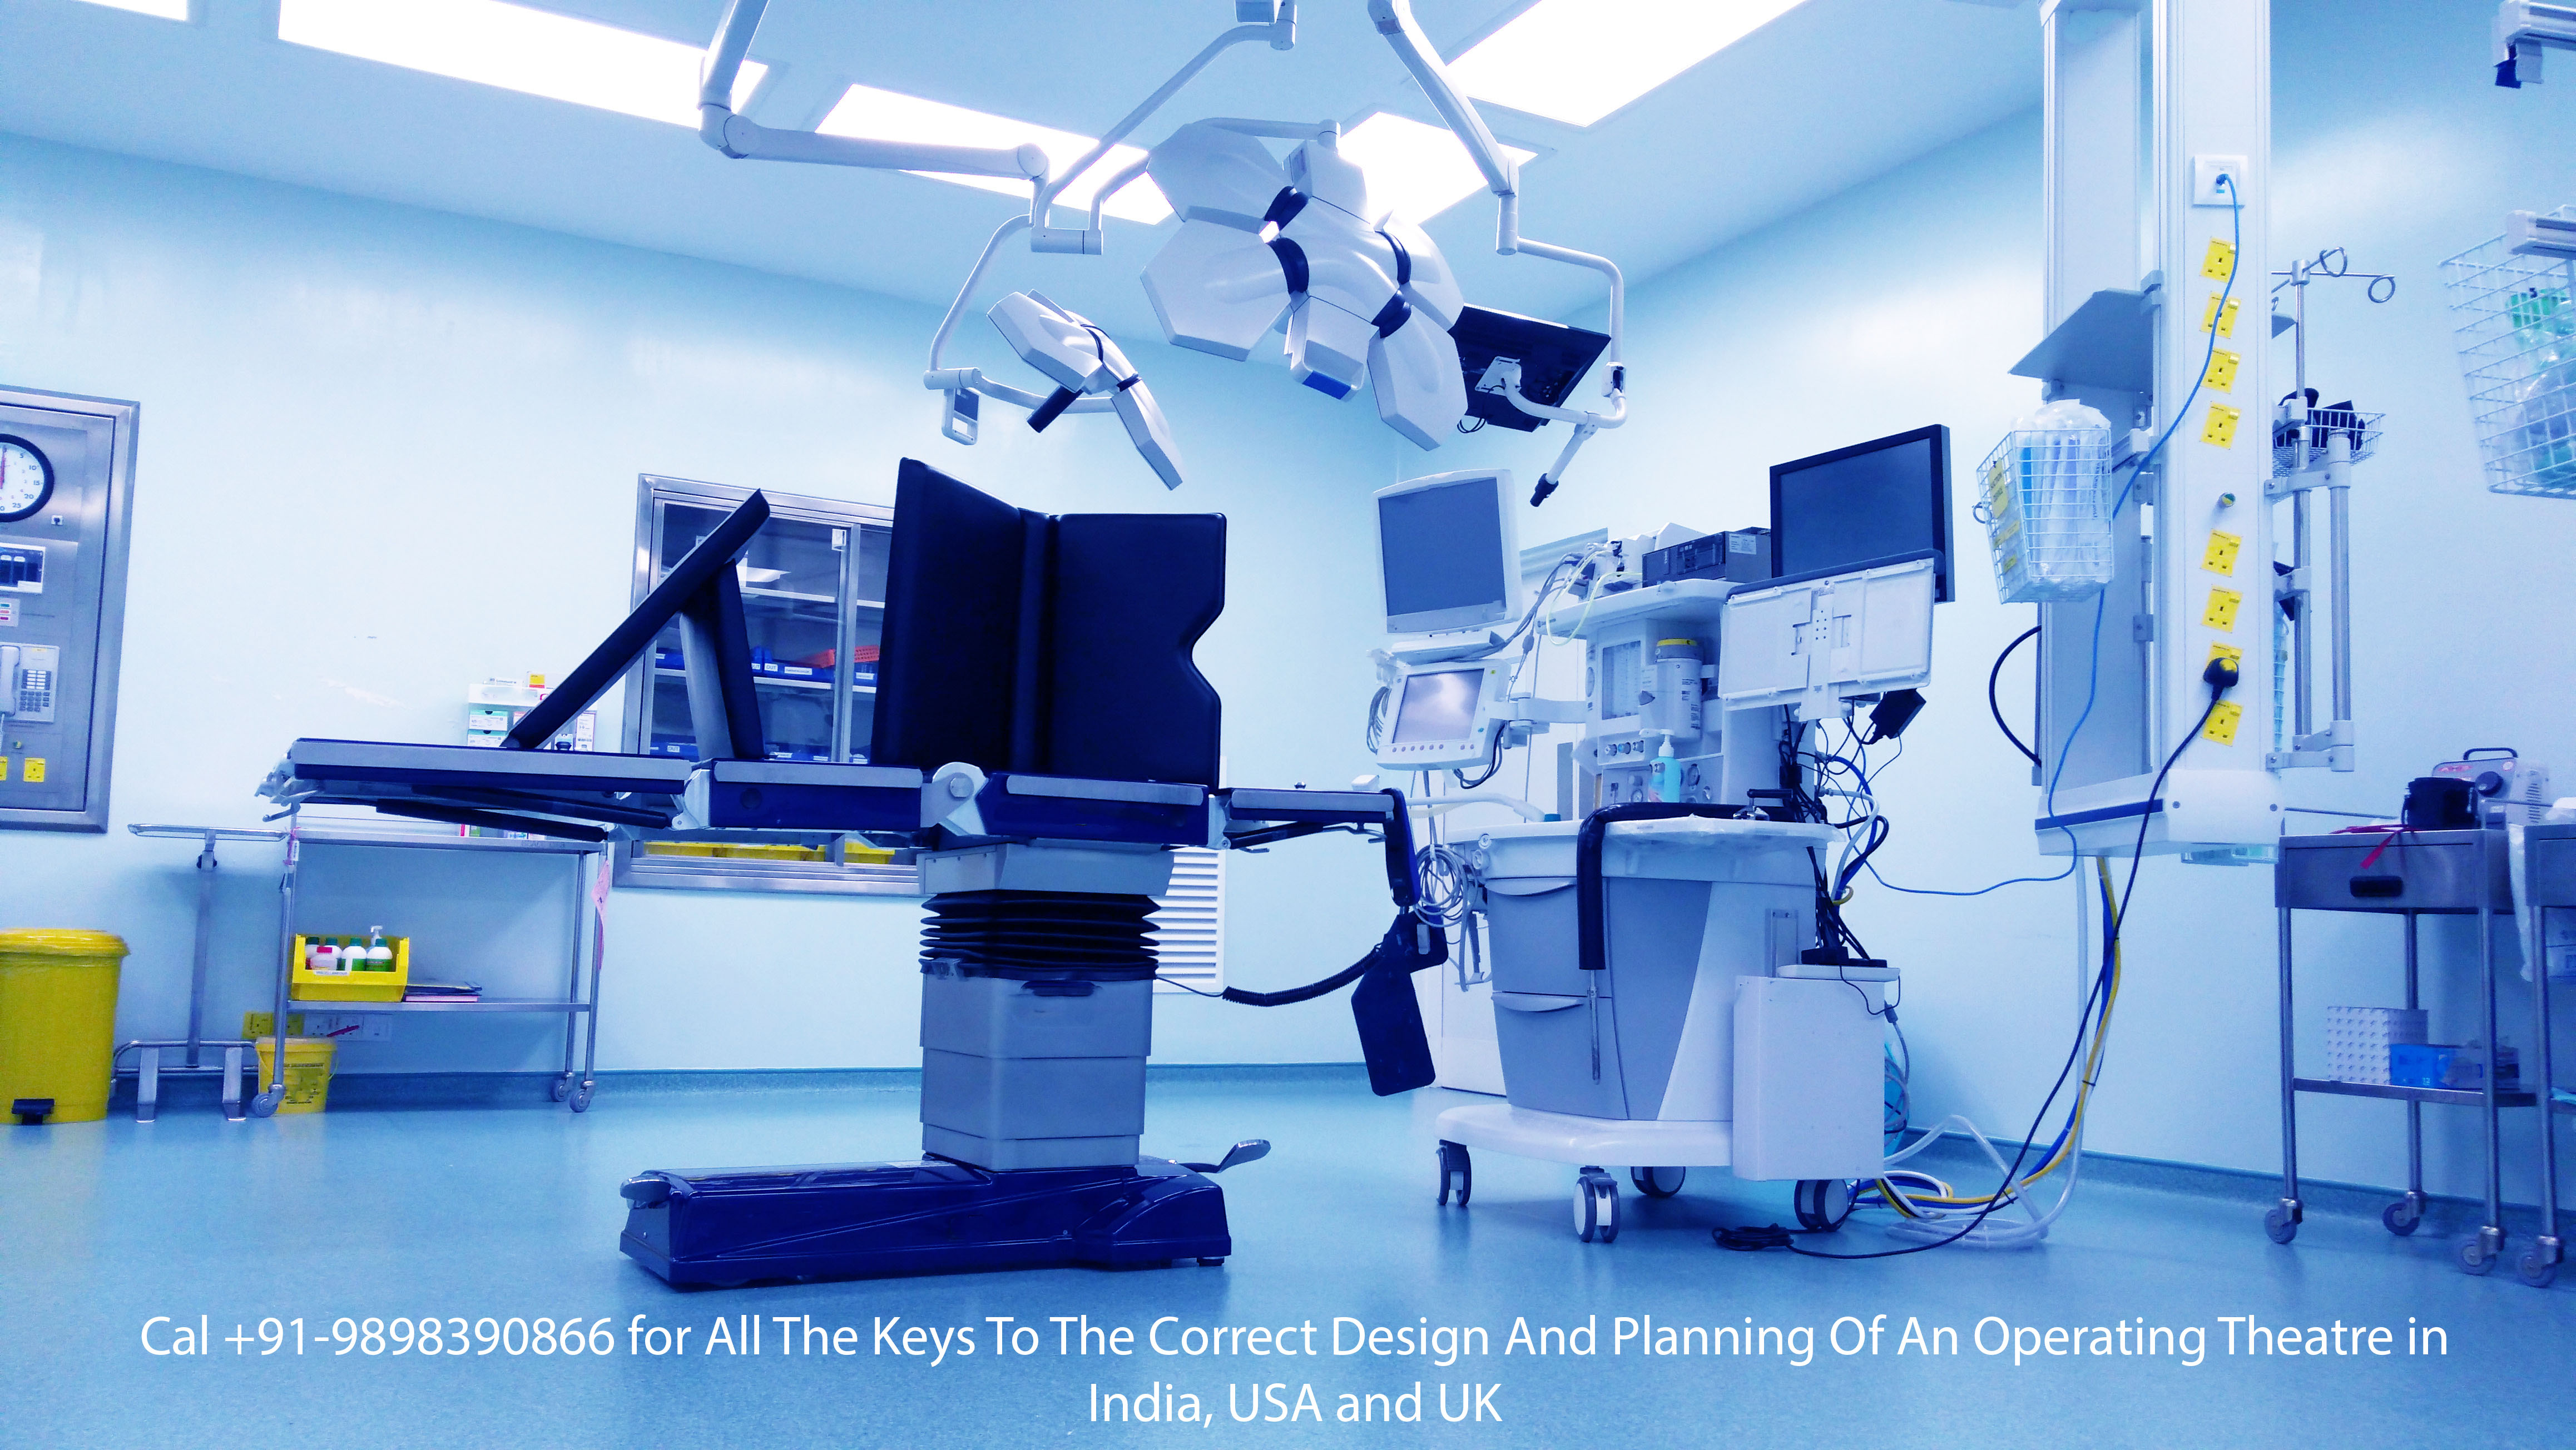 All The Keys To The Correct Design And Planning Of An Operating Theatre